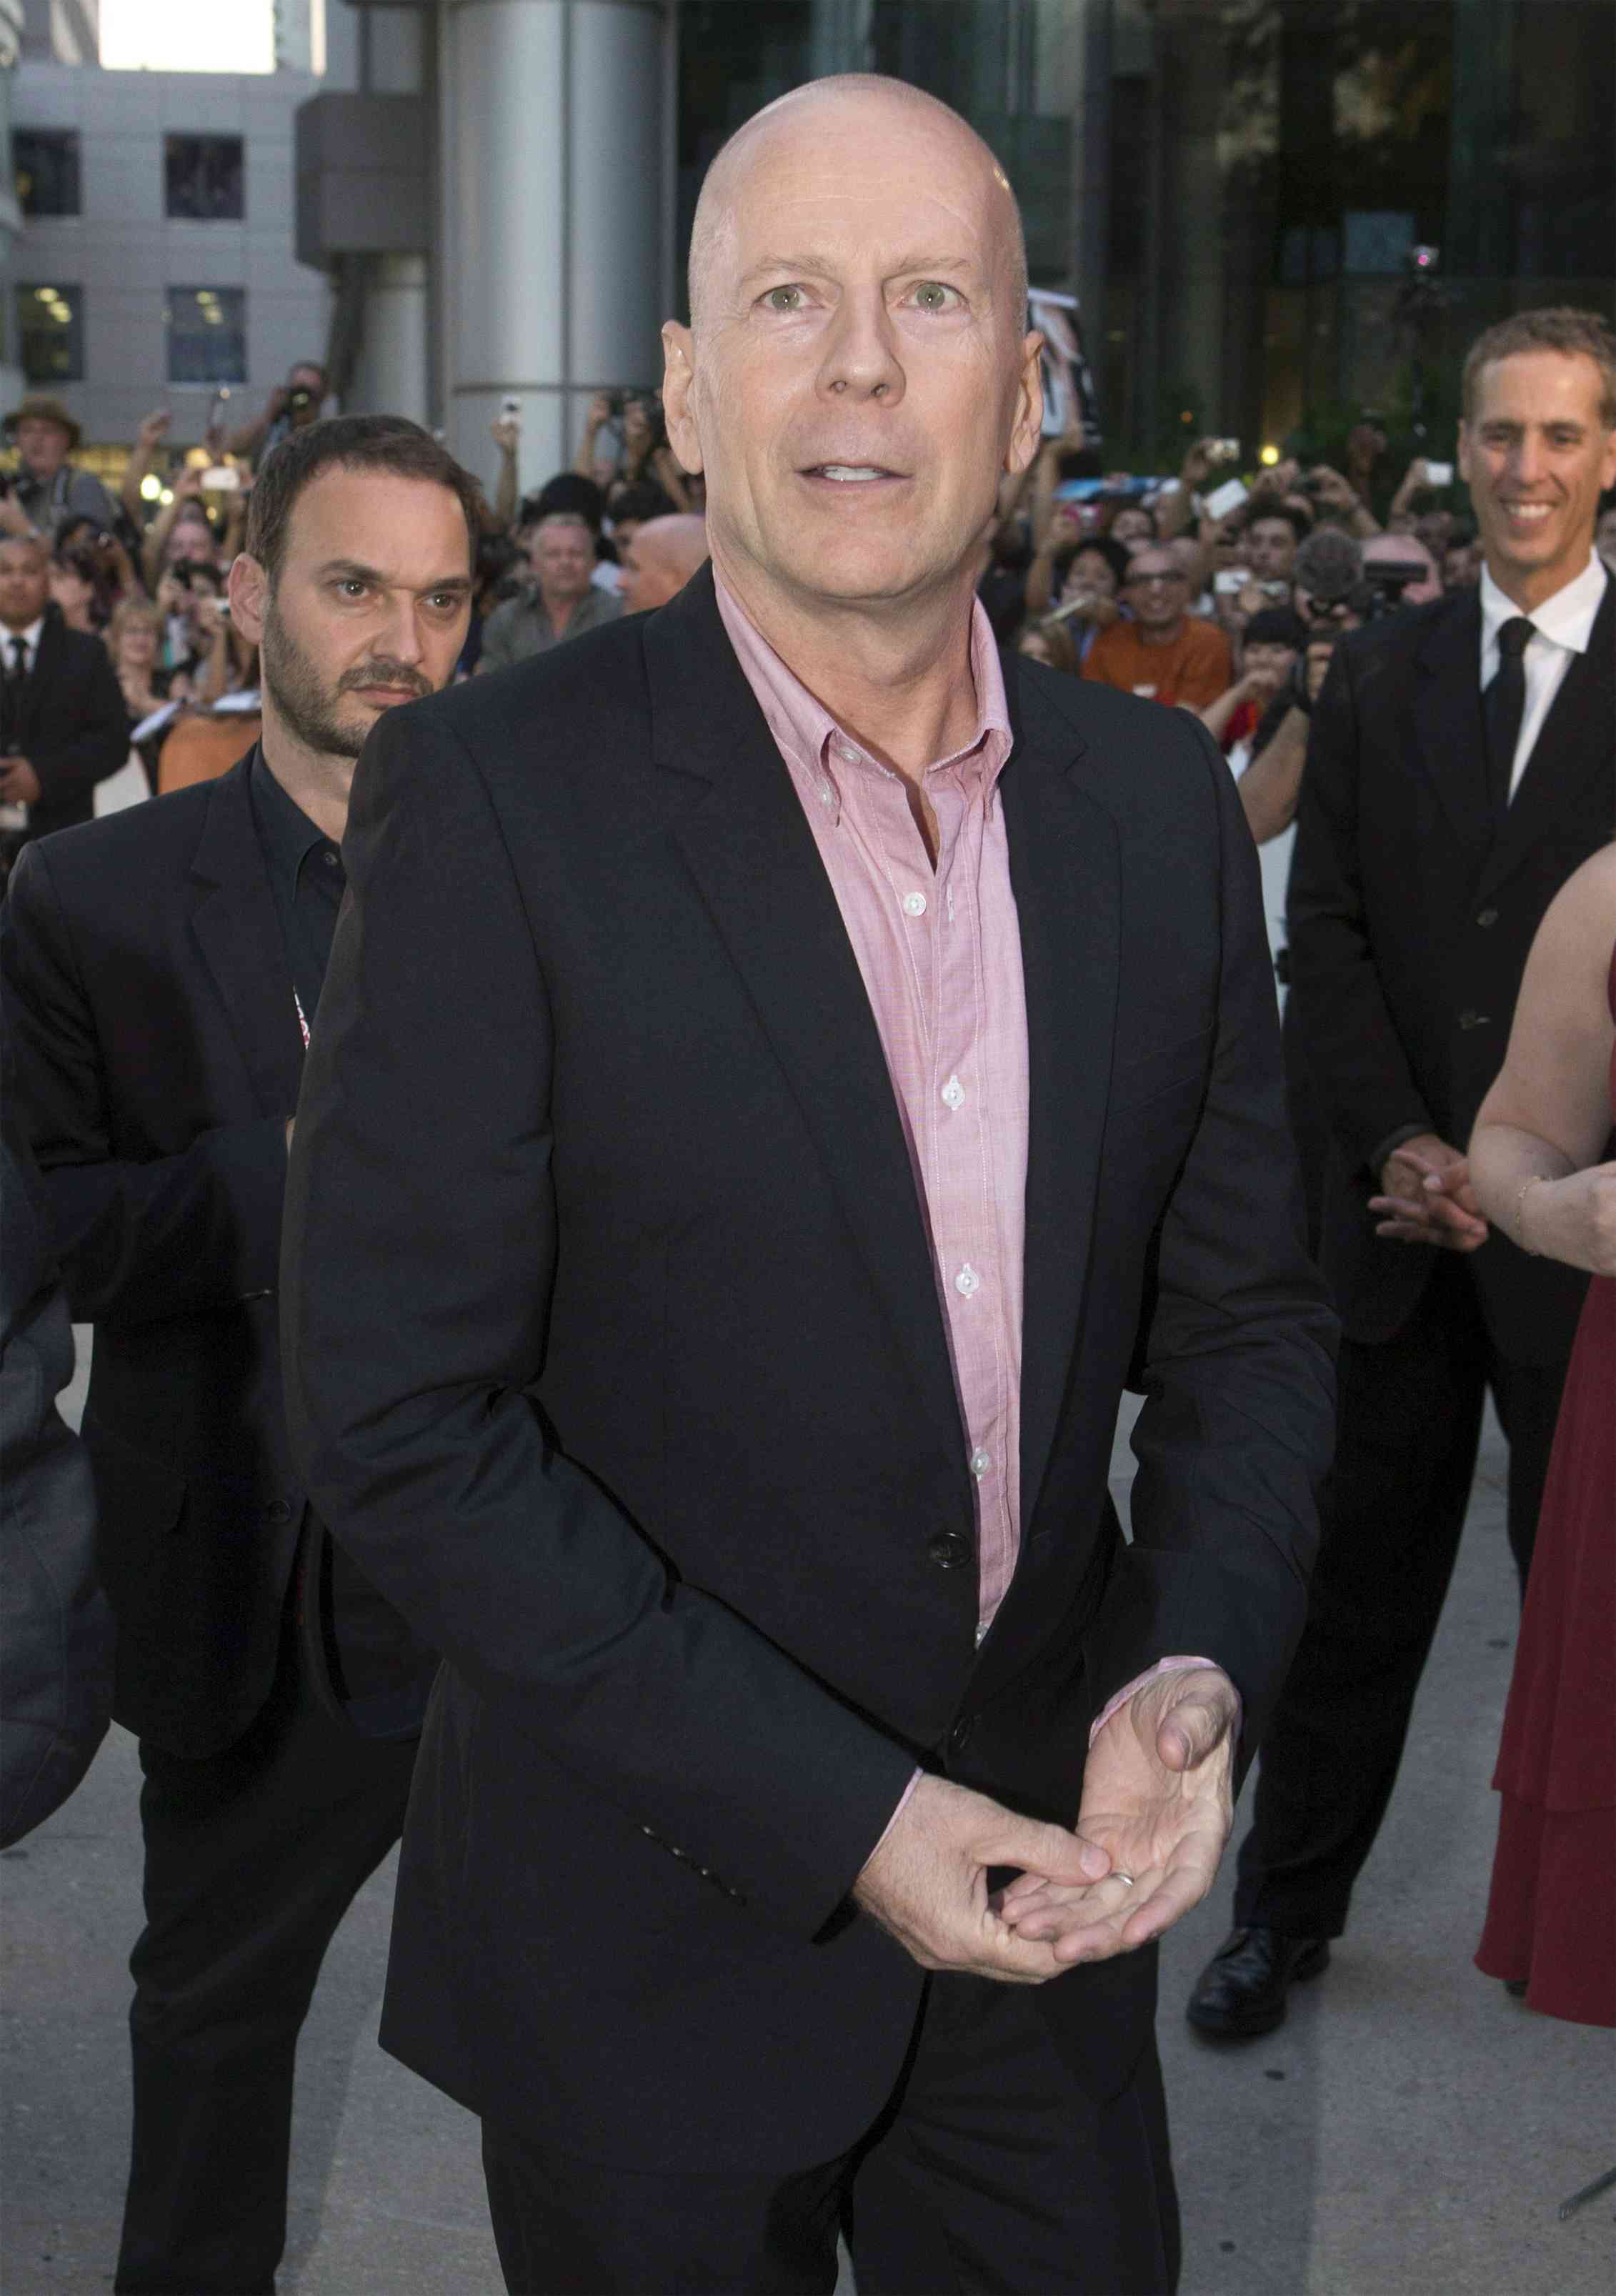 A bald man in a black suit with other people behind him